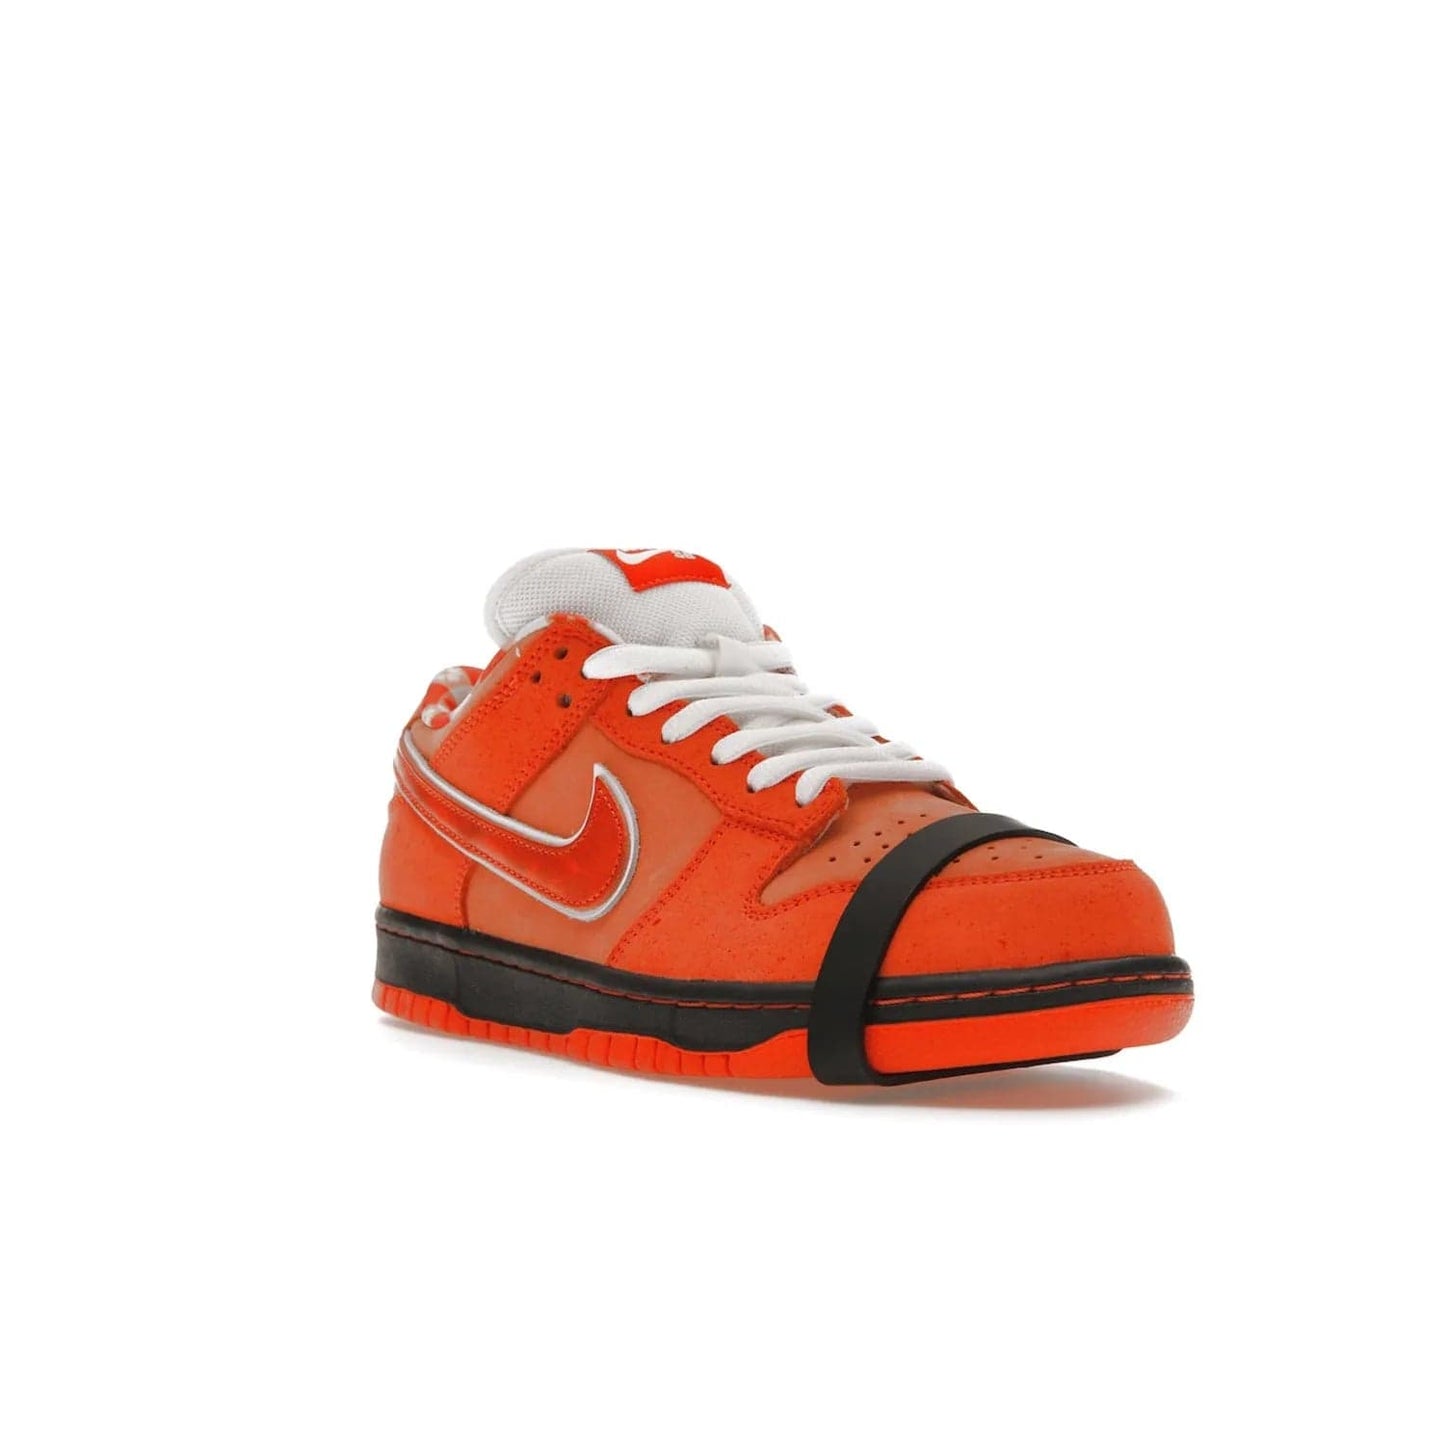 Nike SB Dunk Low Concepts Orange Lobster - Image 6 - Only at www.BallersClubKickz.com - Limited Nike SB Dunk Low Concepts Orange Lobster features premium nubuck upper with vibrant oranges for eye-catching colorblocked design. Signature Nike SB tag and bib-inspired interior for added texture. Outsole and cupsole provide extra reinforcement. Get it 12/20/2022.